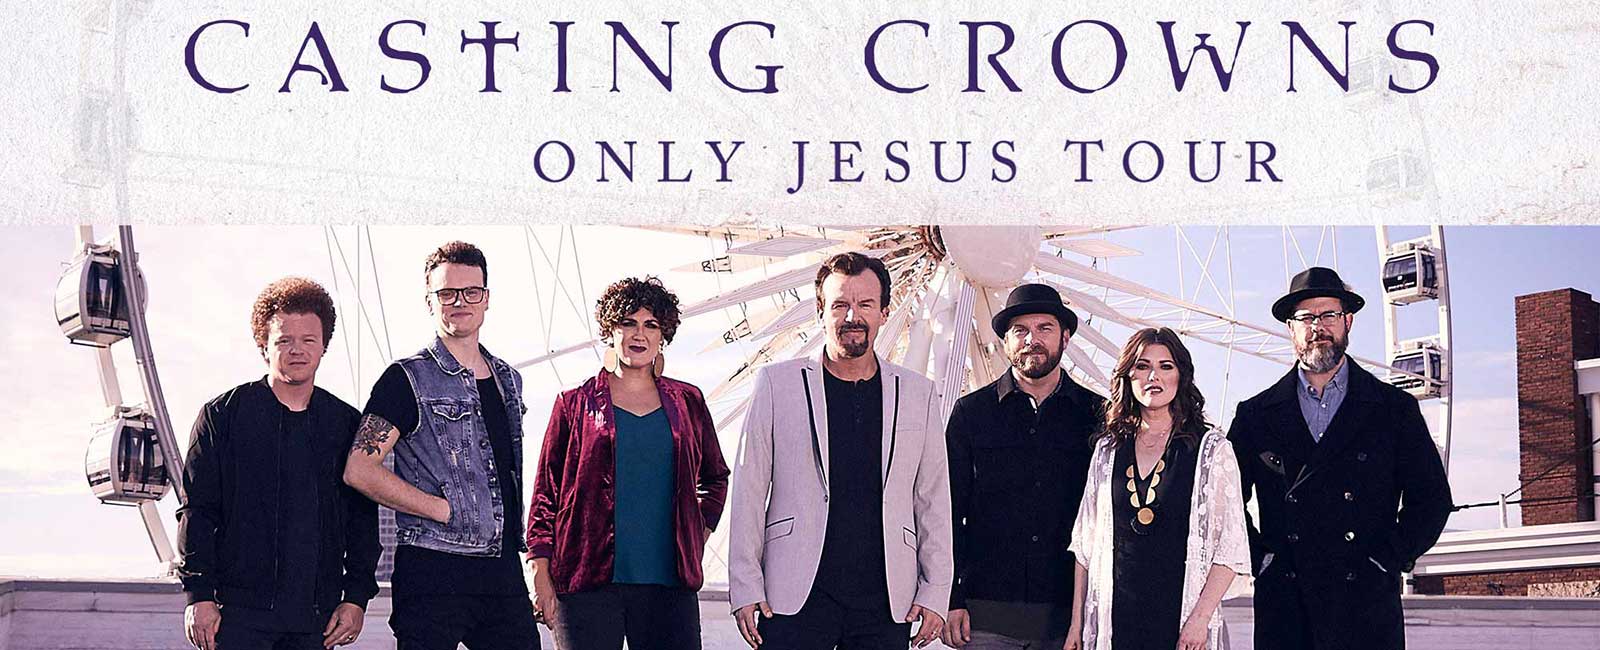 Casting Crowns 'Only Jesus' Tour